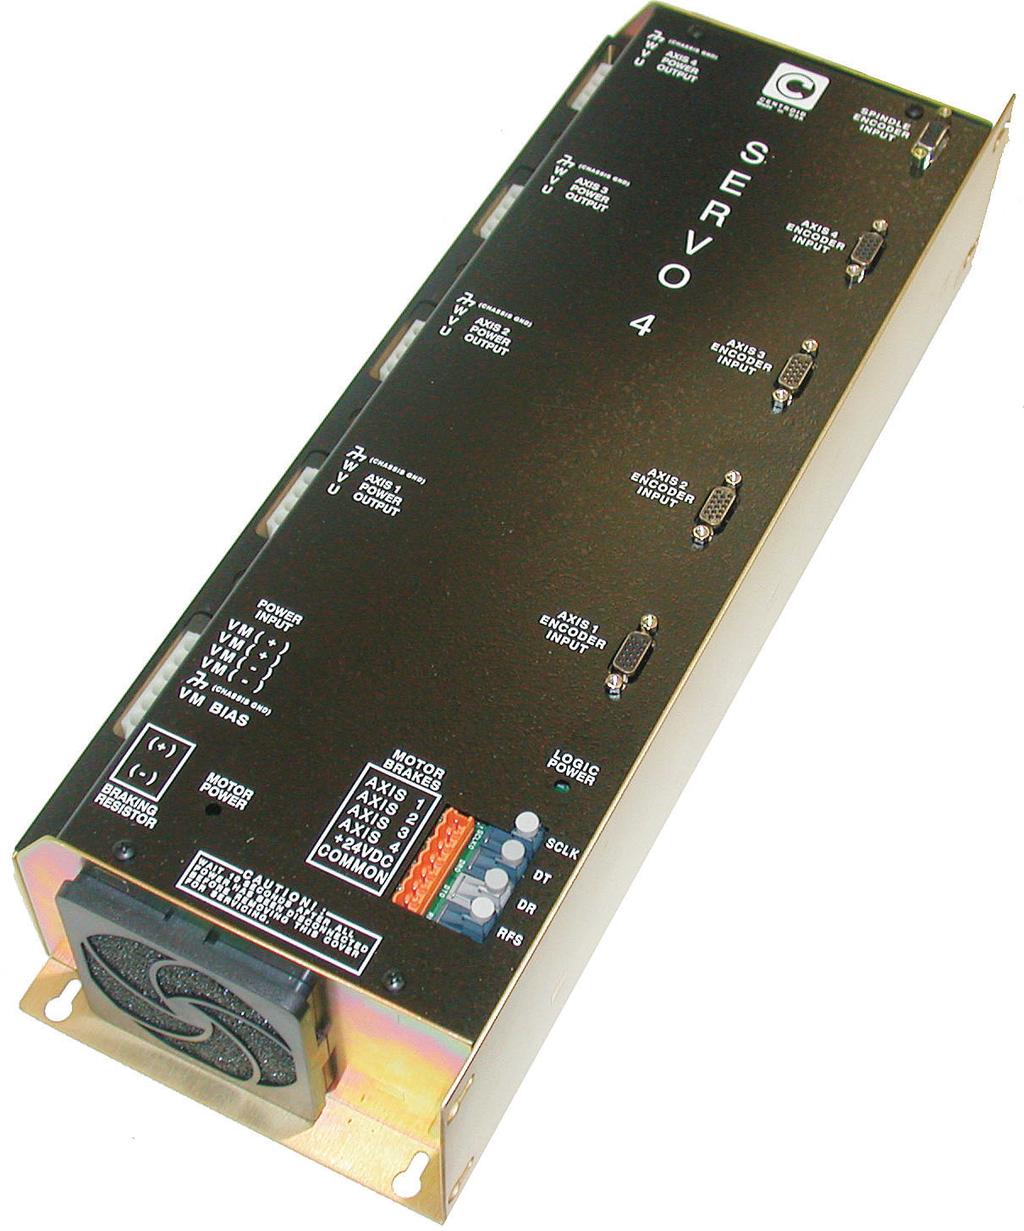 4 Axis, up to 2 KW motors Brake Output for each axis Overtemp and Overcurrent Protection All-software Configuration Self-cooled Fiber Optic Control CENTROIDTM AC Brushless Drive Product Spec Sheet AC